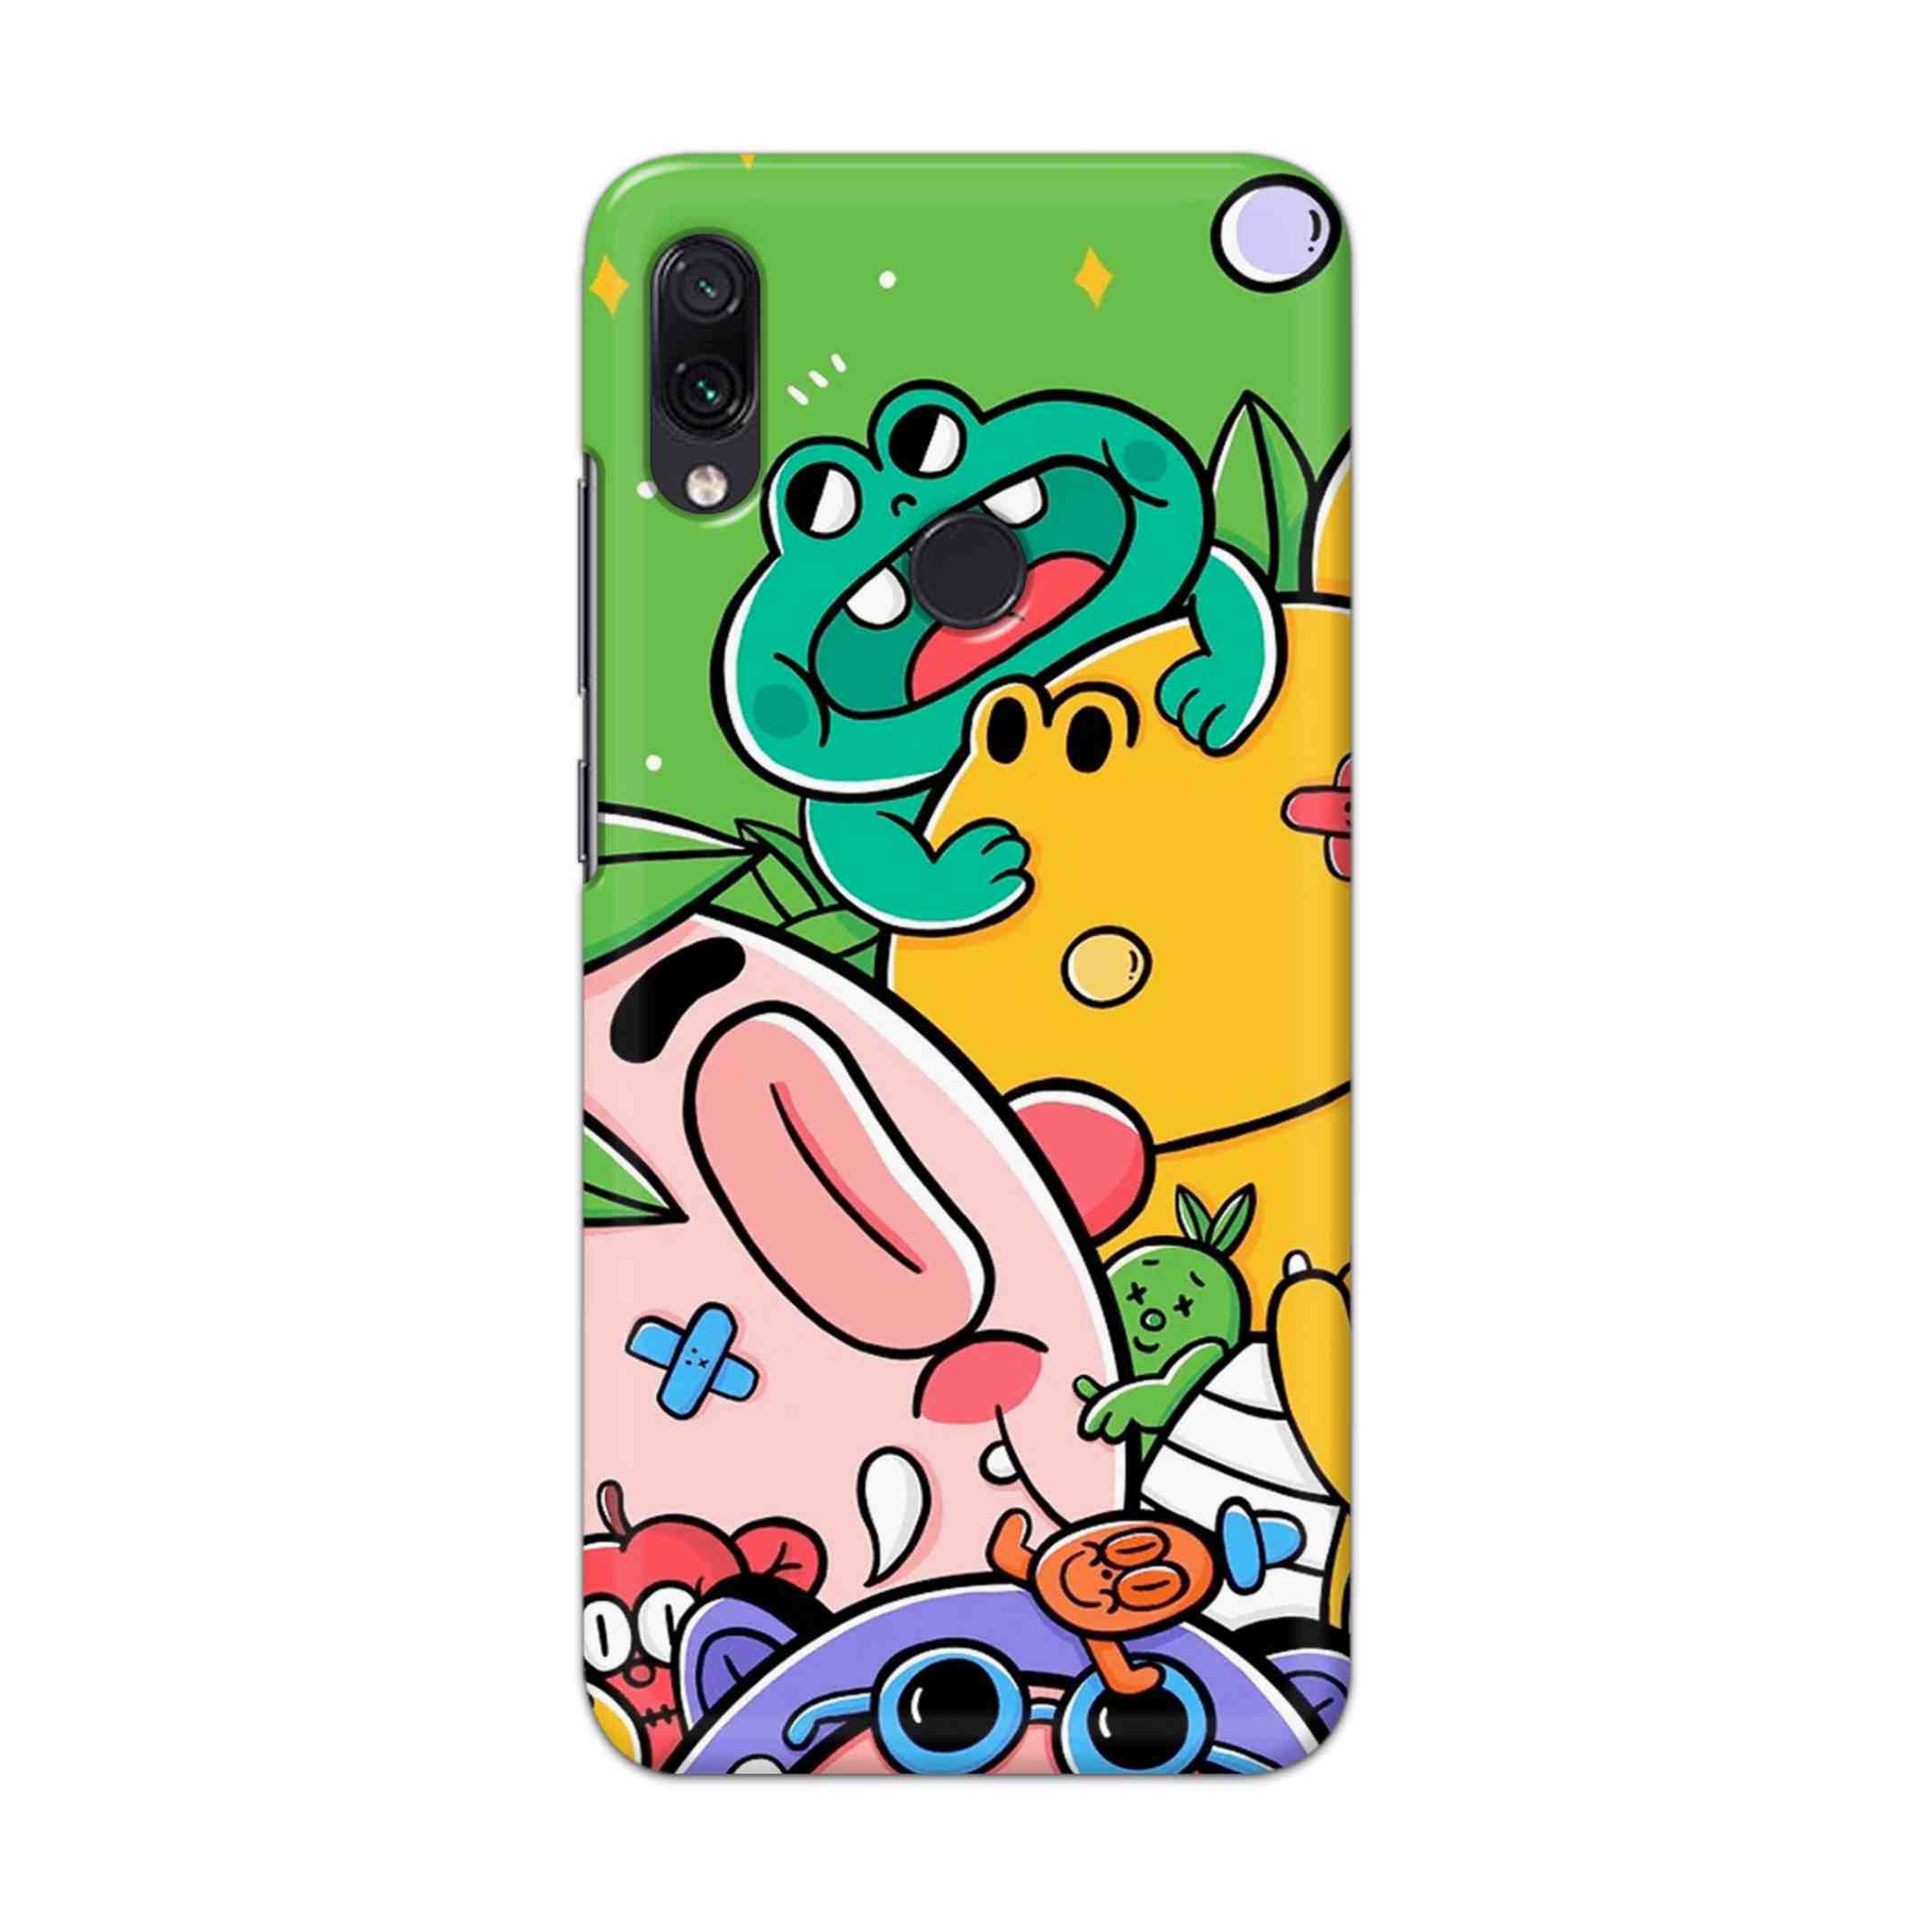 Buy Hello Feng San Hard Back Mobile Phone Case Cover For Xiaomi Redmi 7 Online